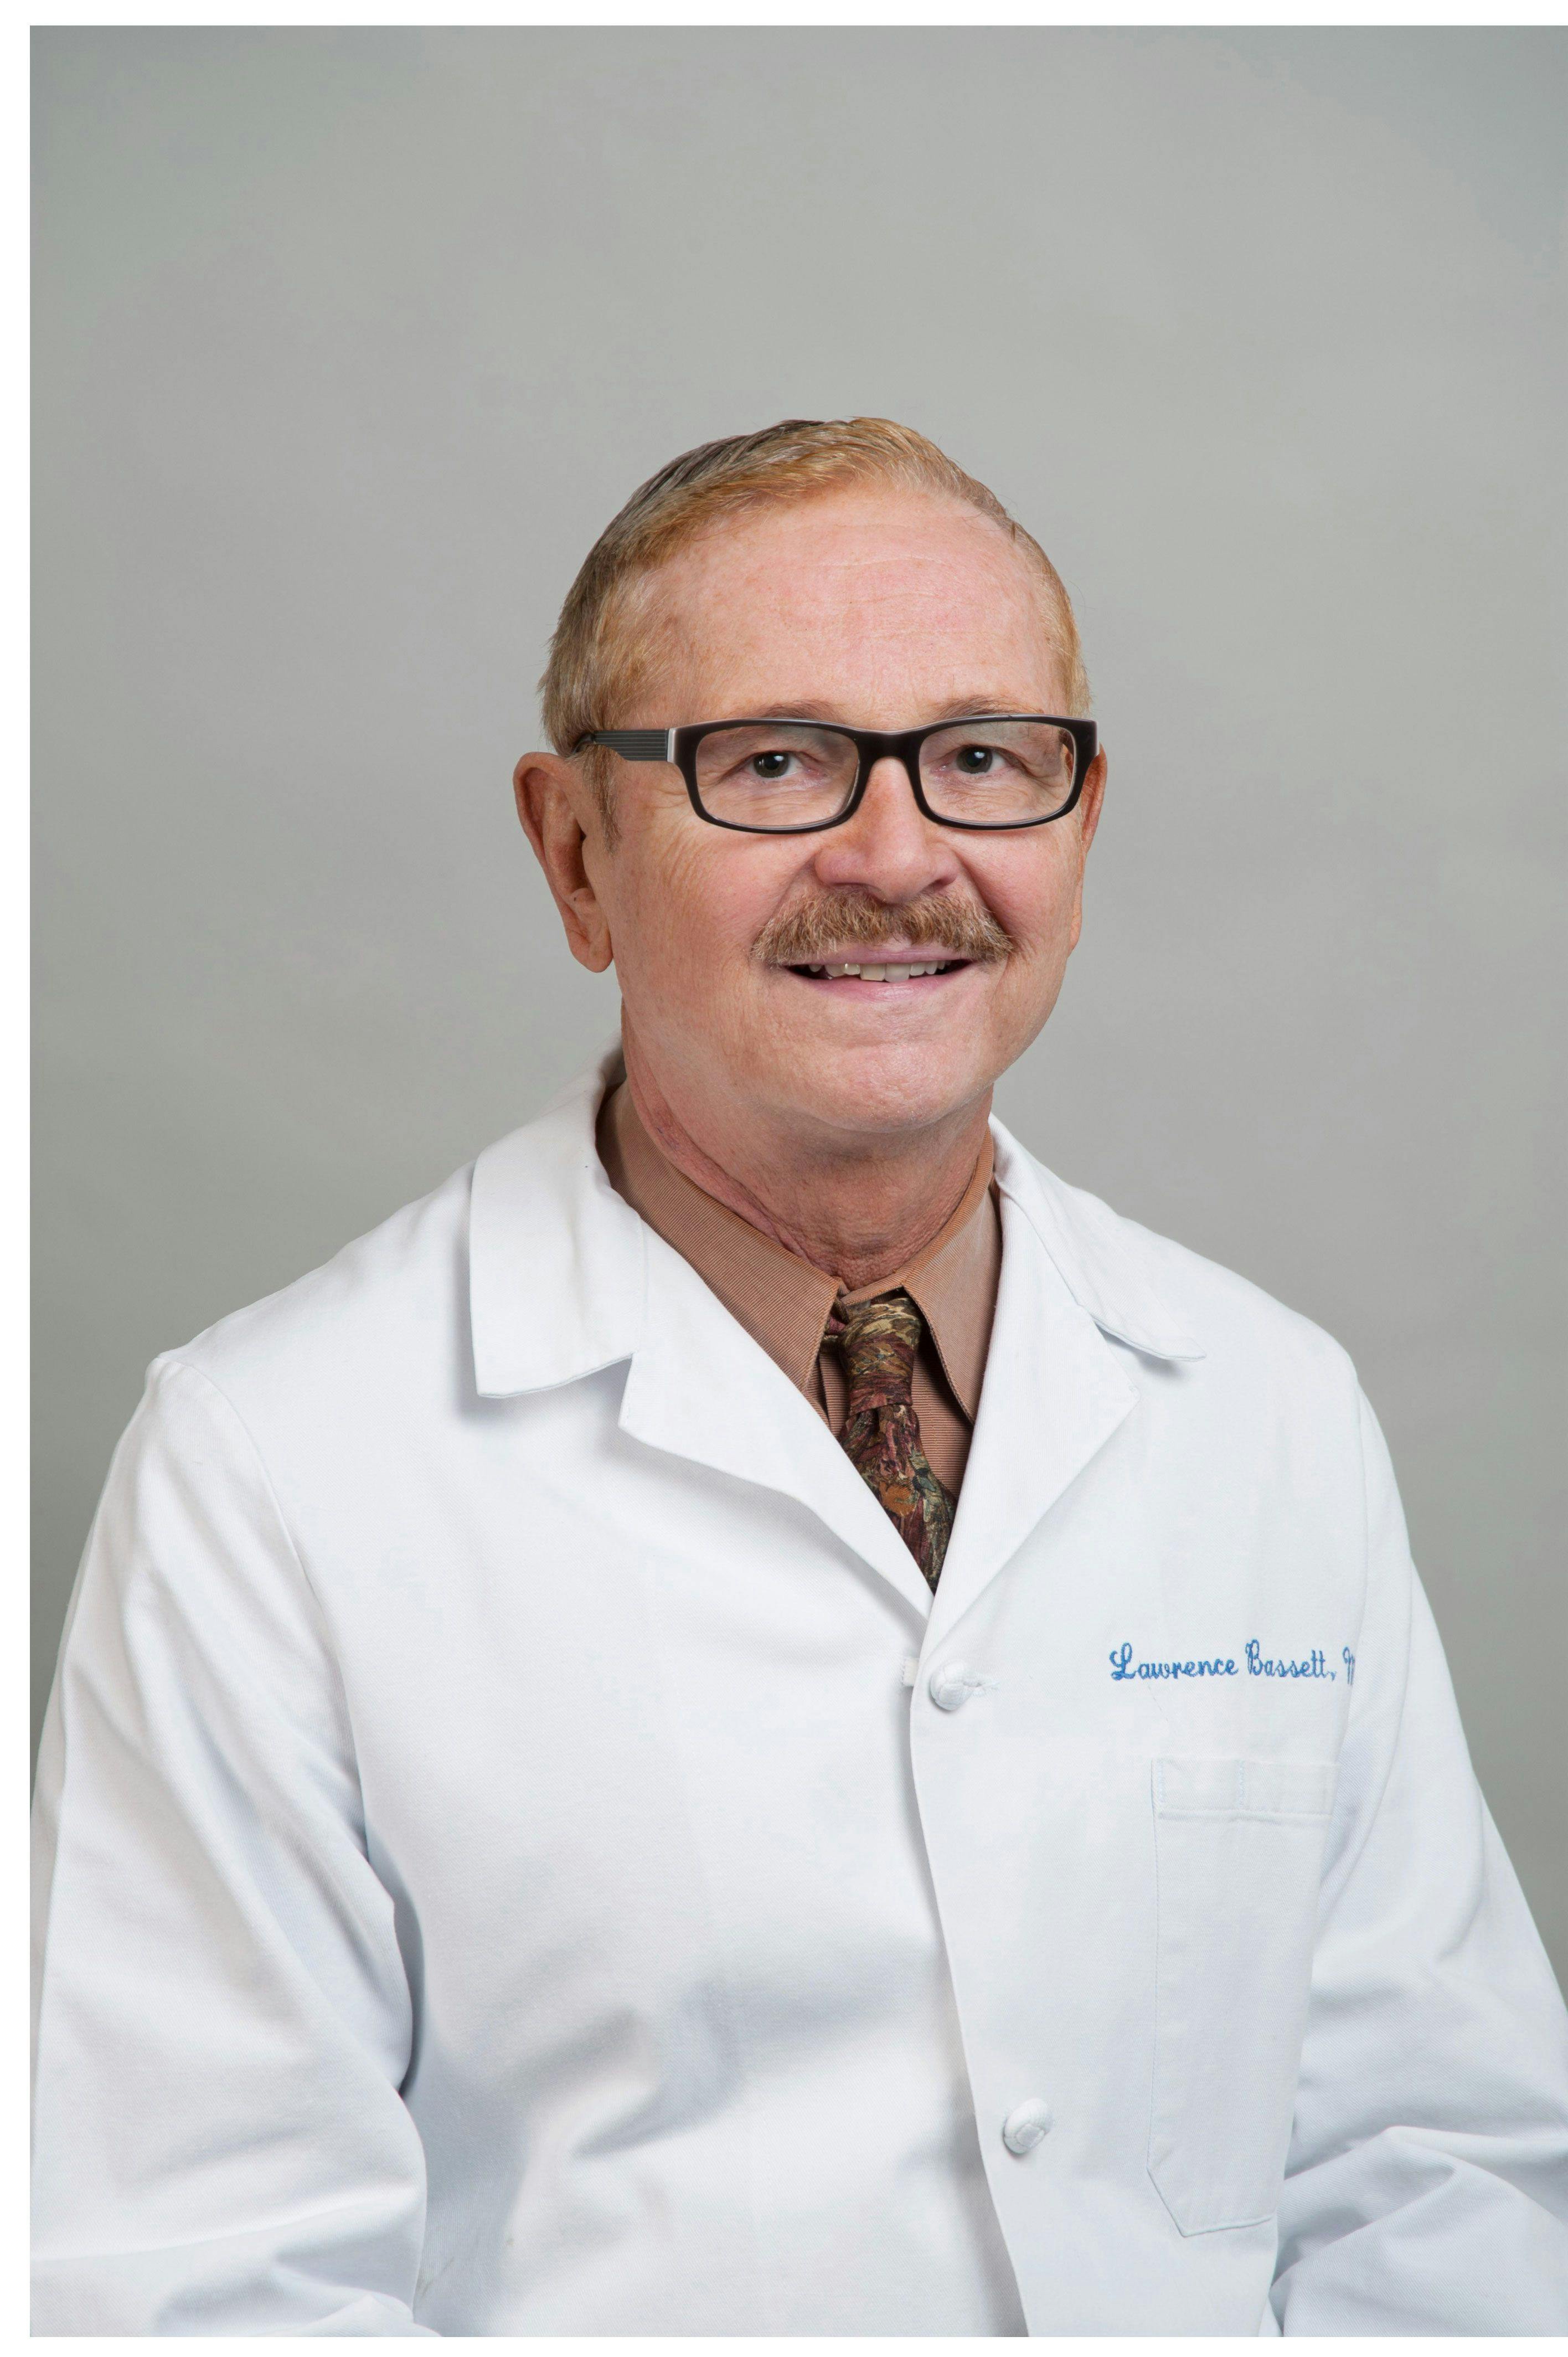 Innovators in Patient Experience: Lawrence Bassett, MD